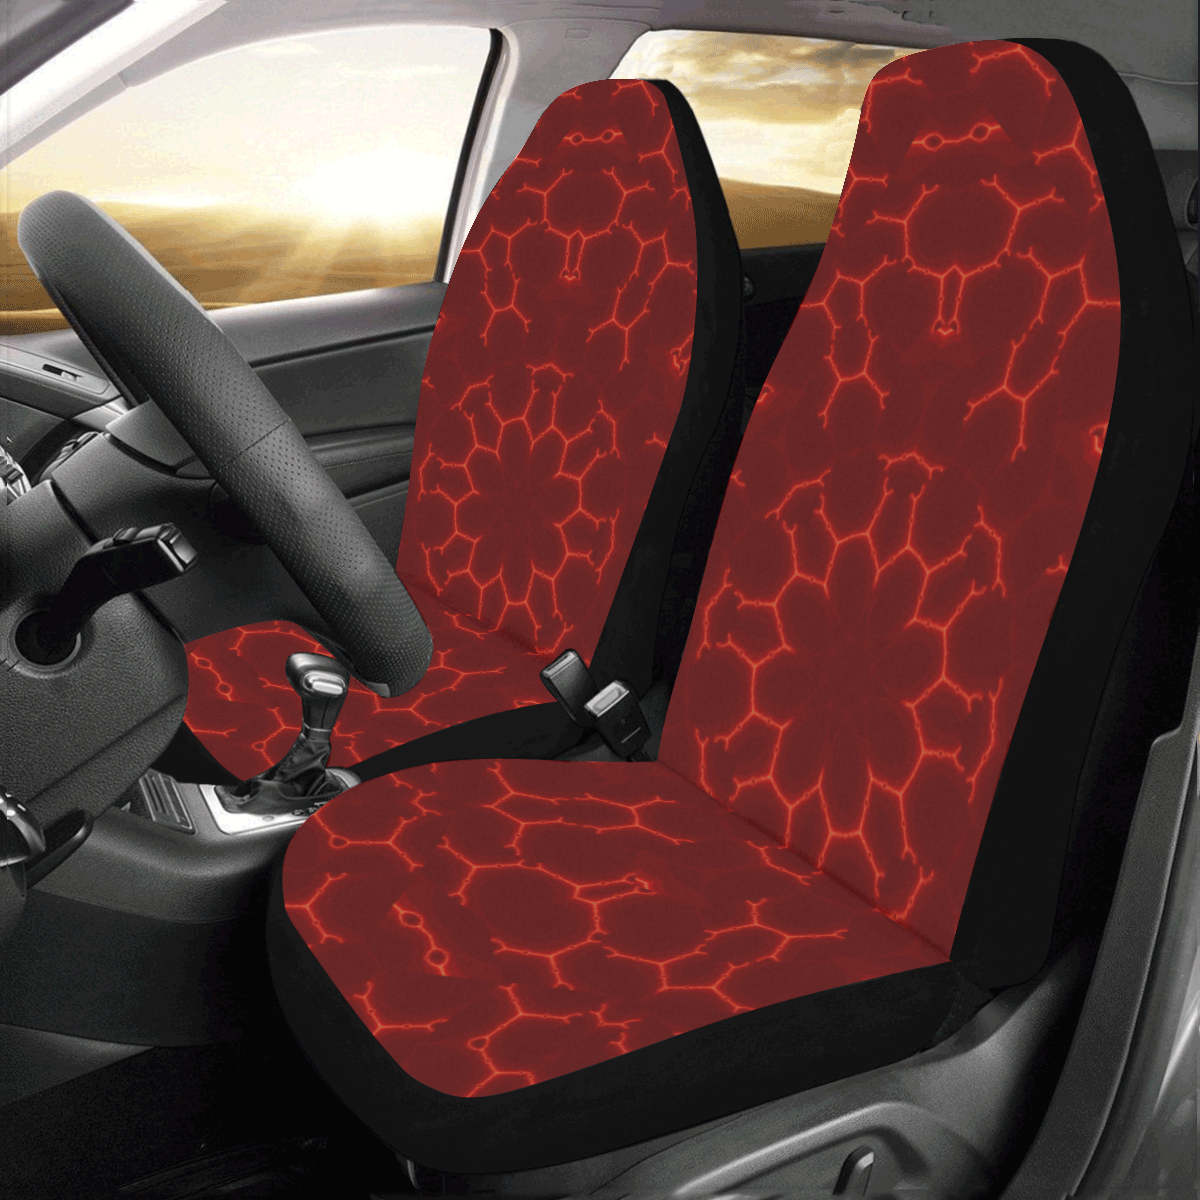 Warm Floral Car Seat Covers (Set of 2)